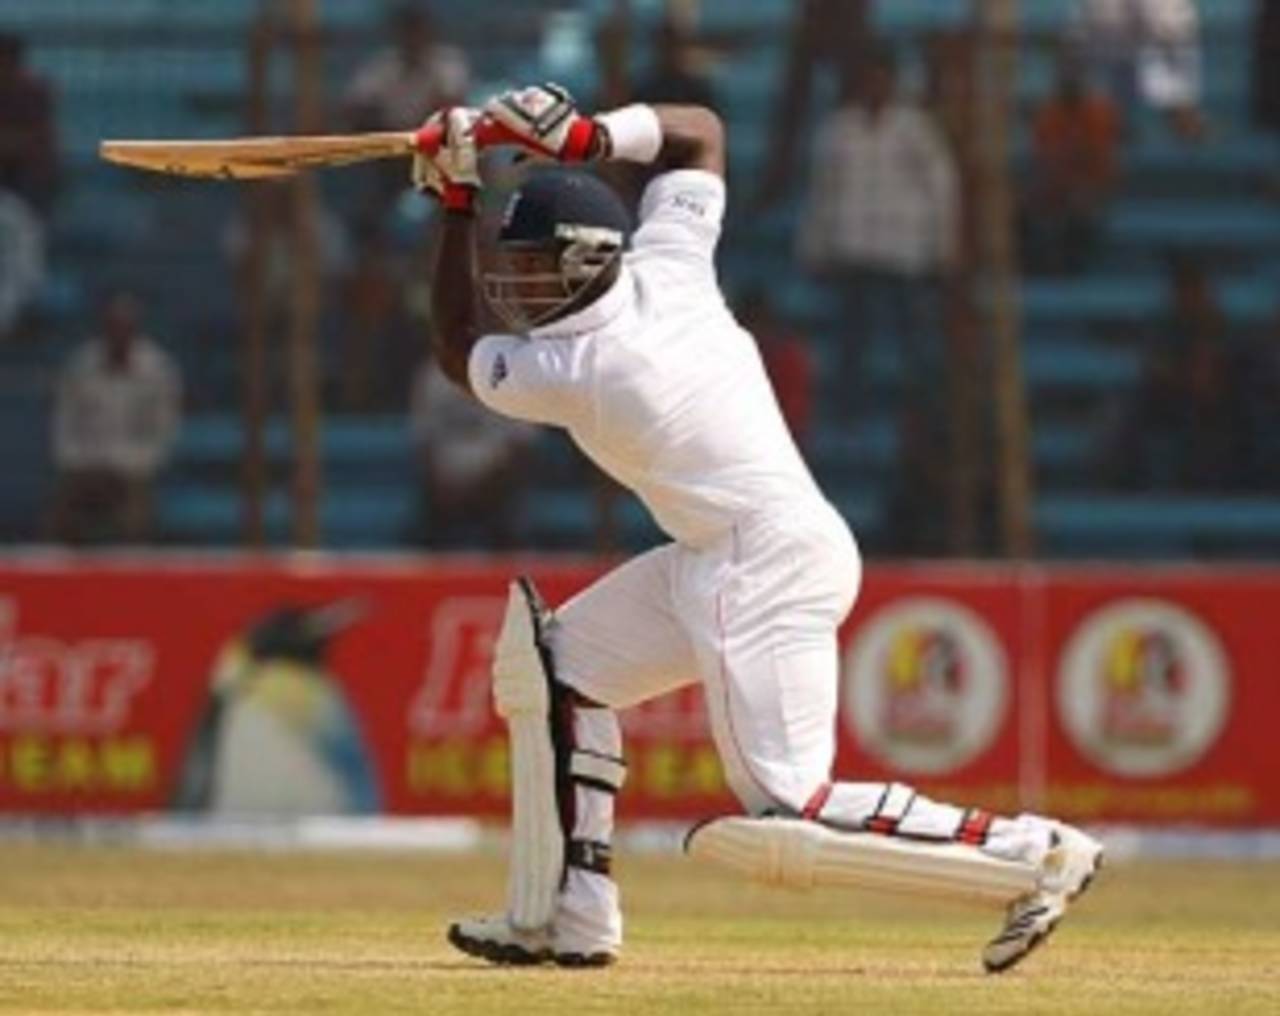 Michael Carberry played a Test for England in Bangladesh last year before suffering a career-threatening injury&nbsp;&nbsp;&bull;&nbsp;&nbsp;Getty Images